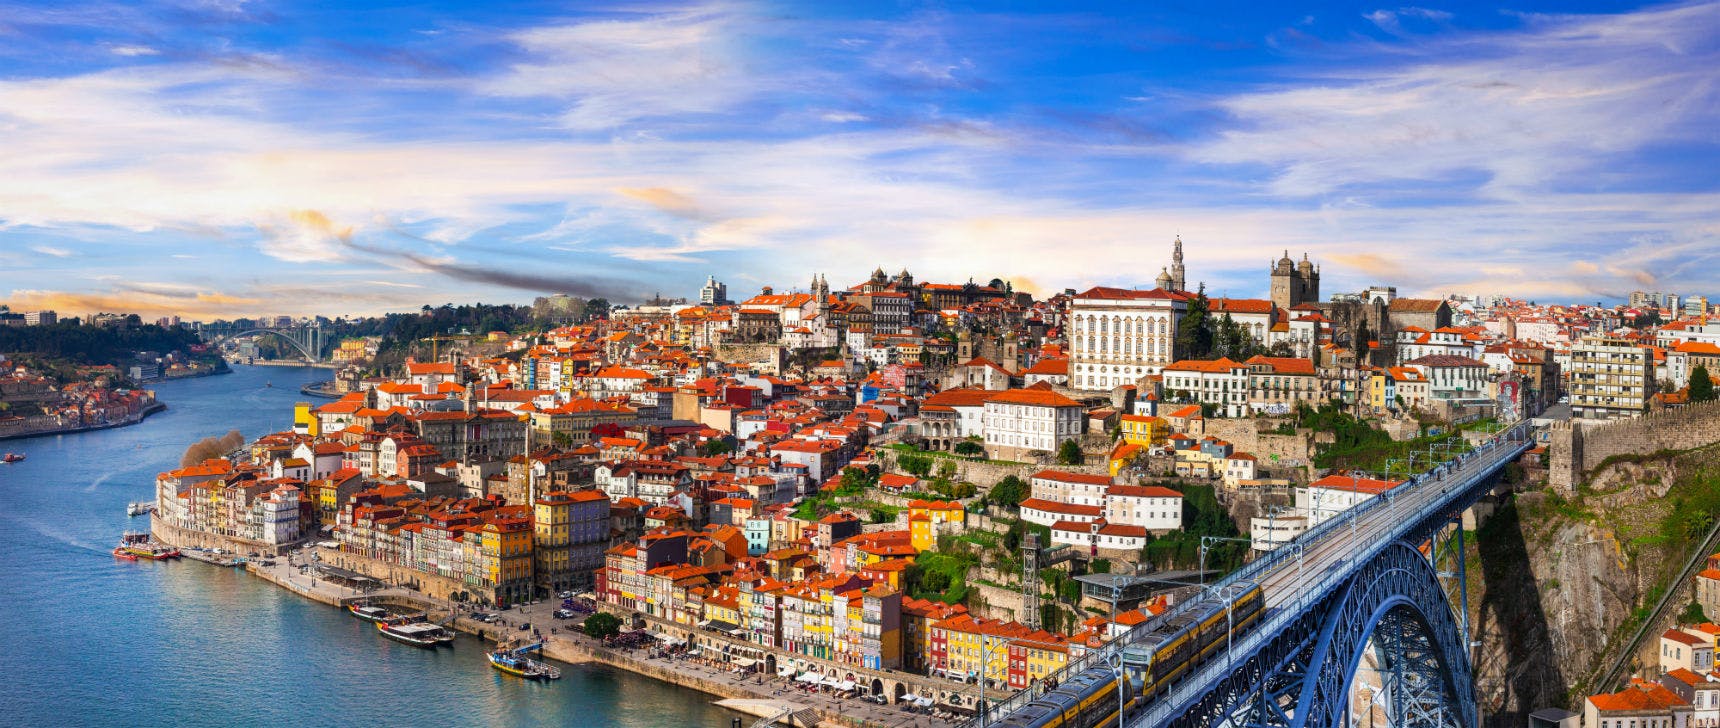 Things to do in Porto: Attractions, tours, and museums